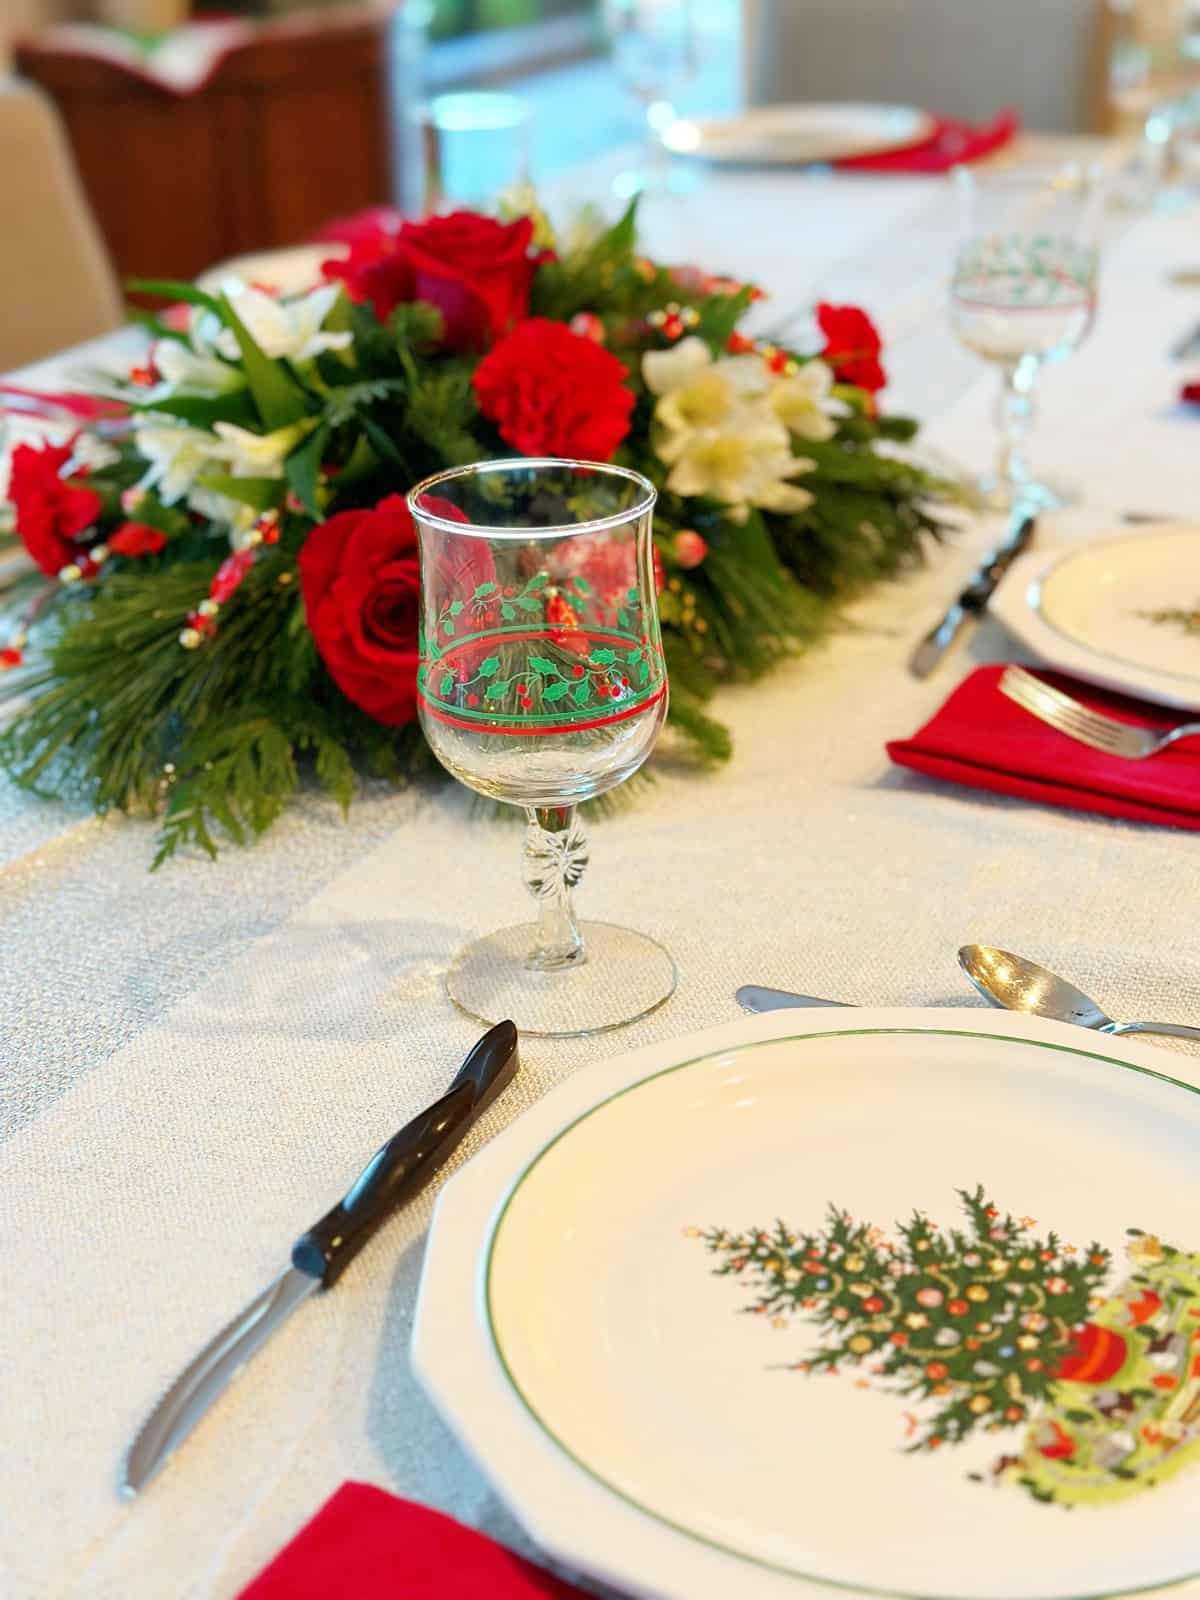 Christmas plate and goblet with Christmas floral arrangement